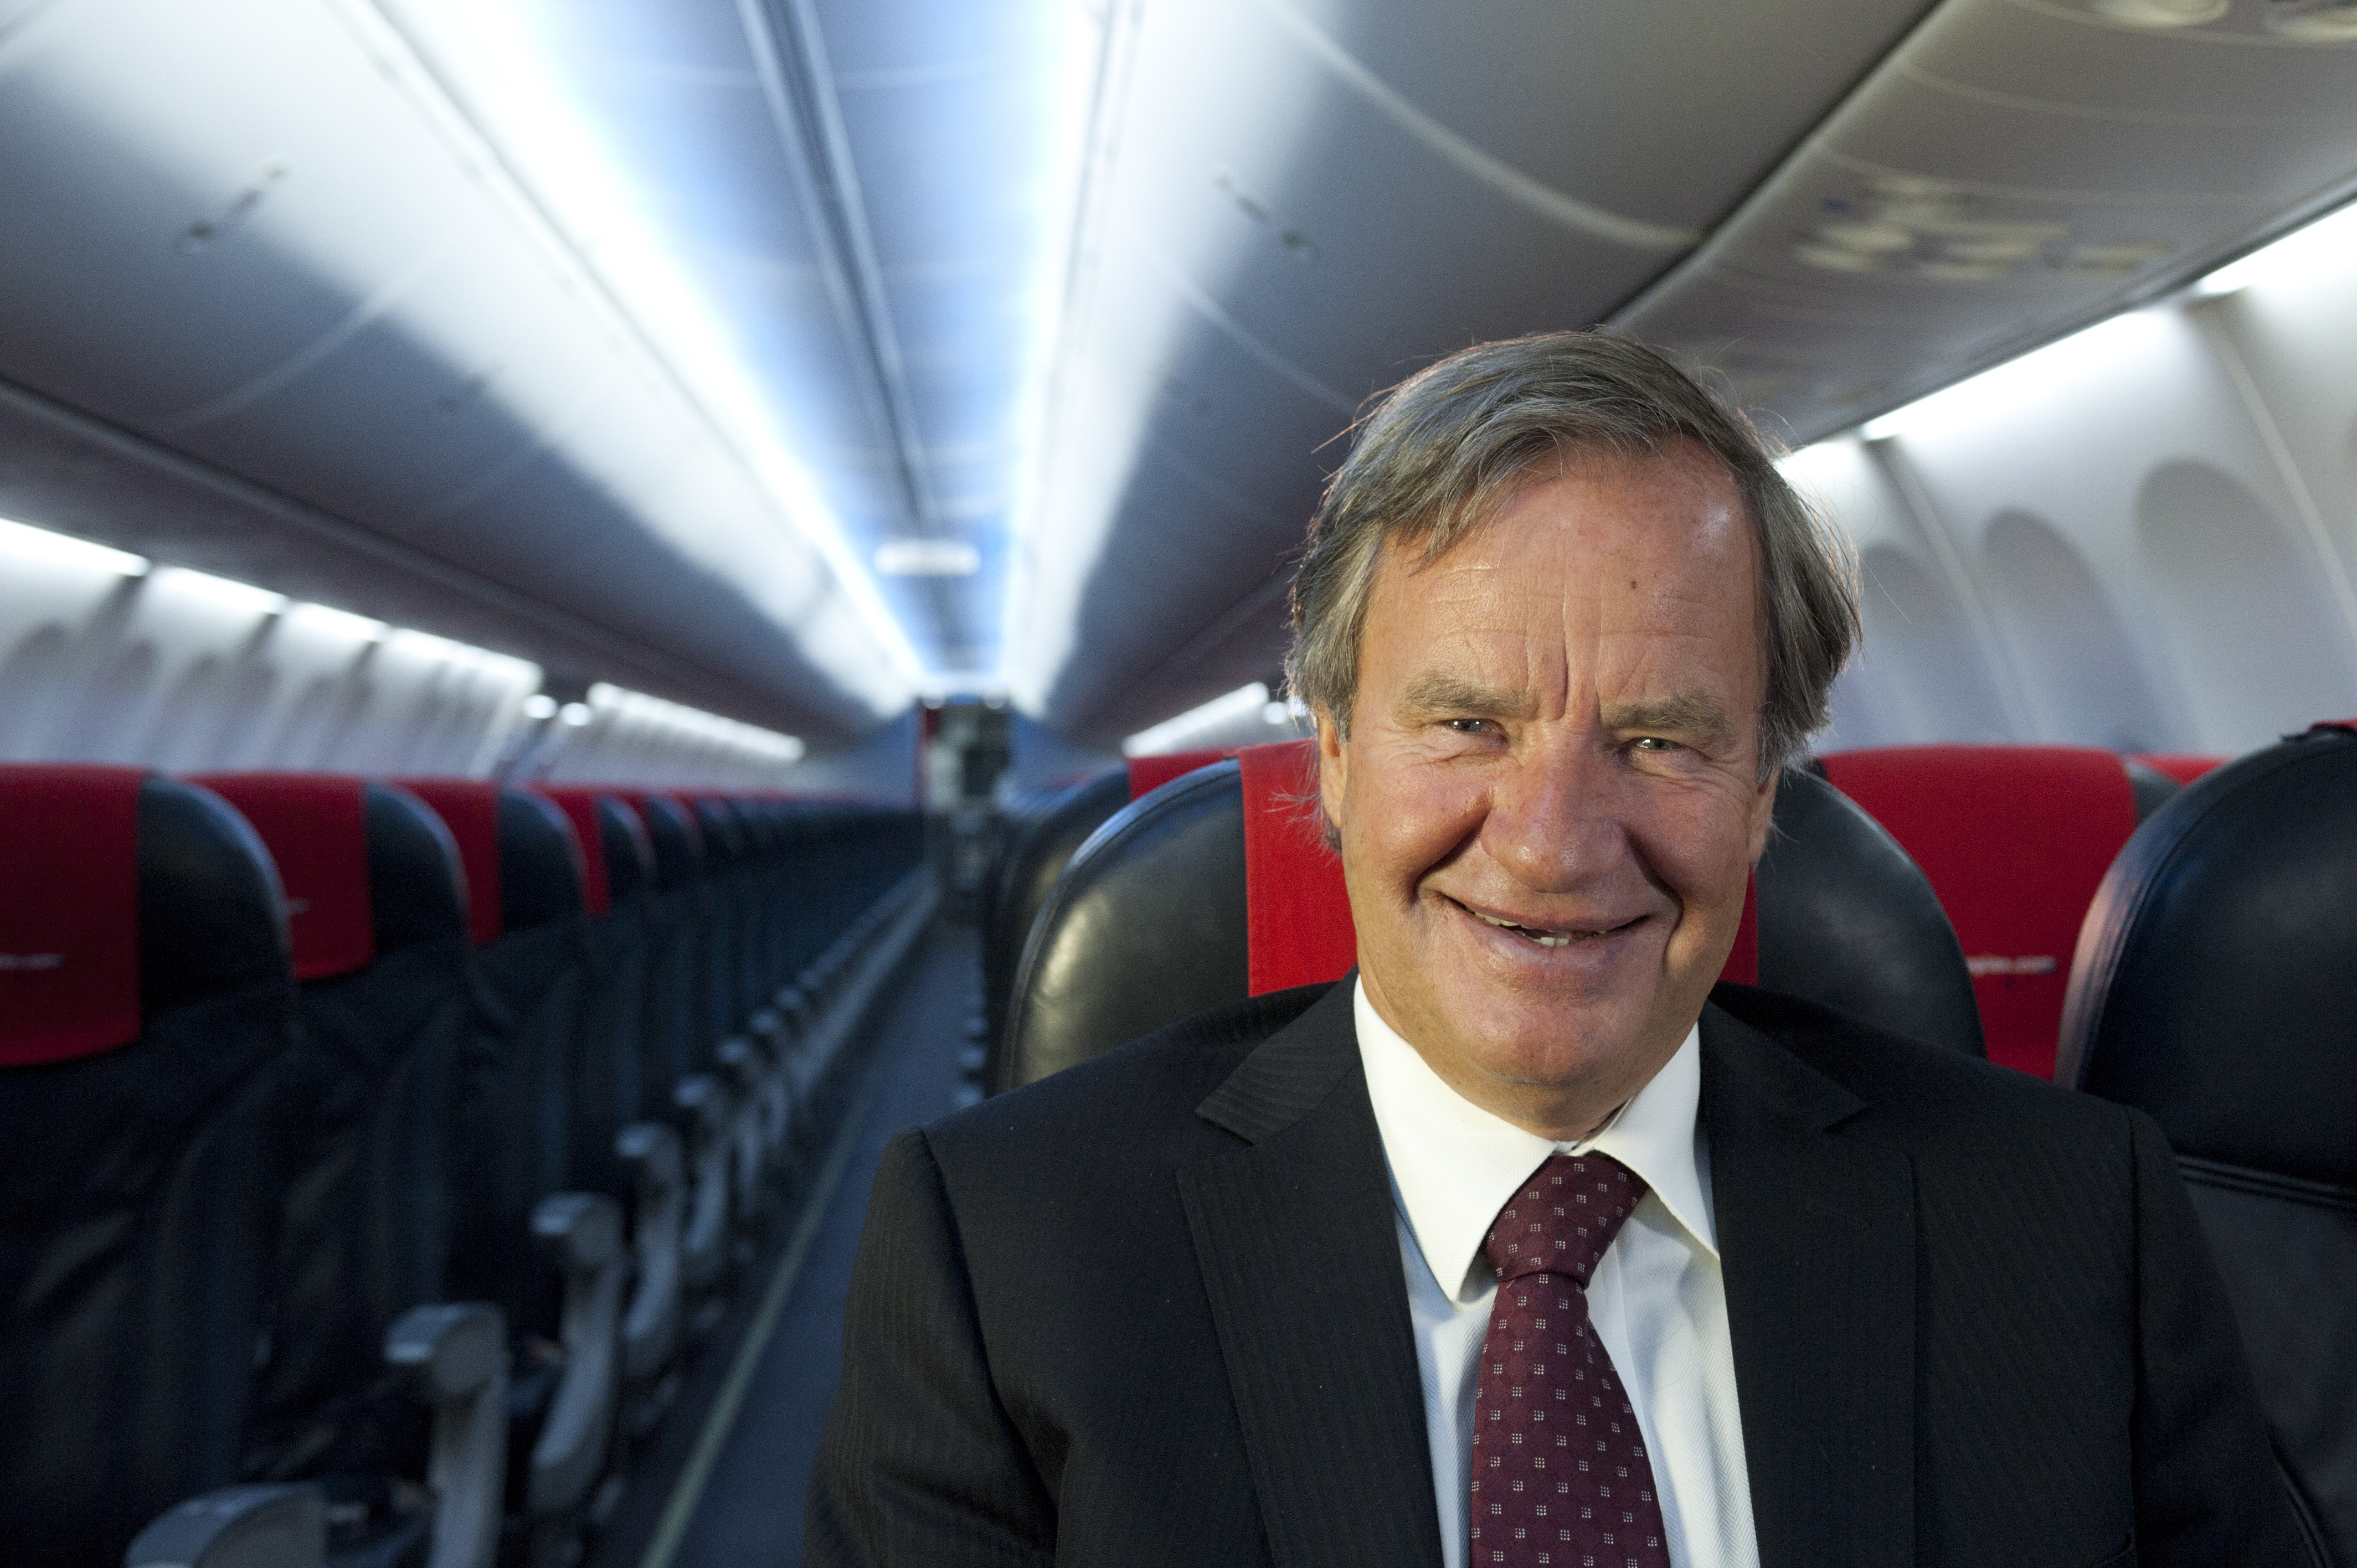 Bjorn Kjos quits as Norwegian Air Shuttle CEO after 17 years in top job